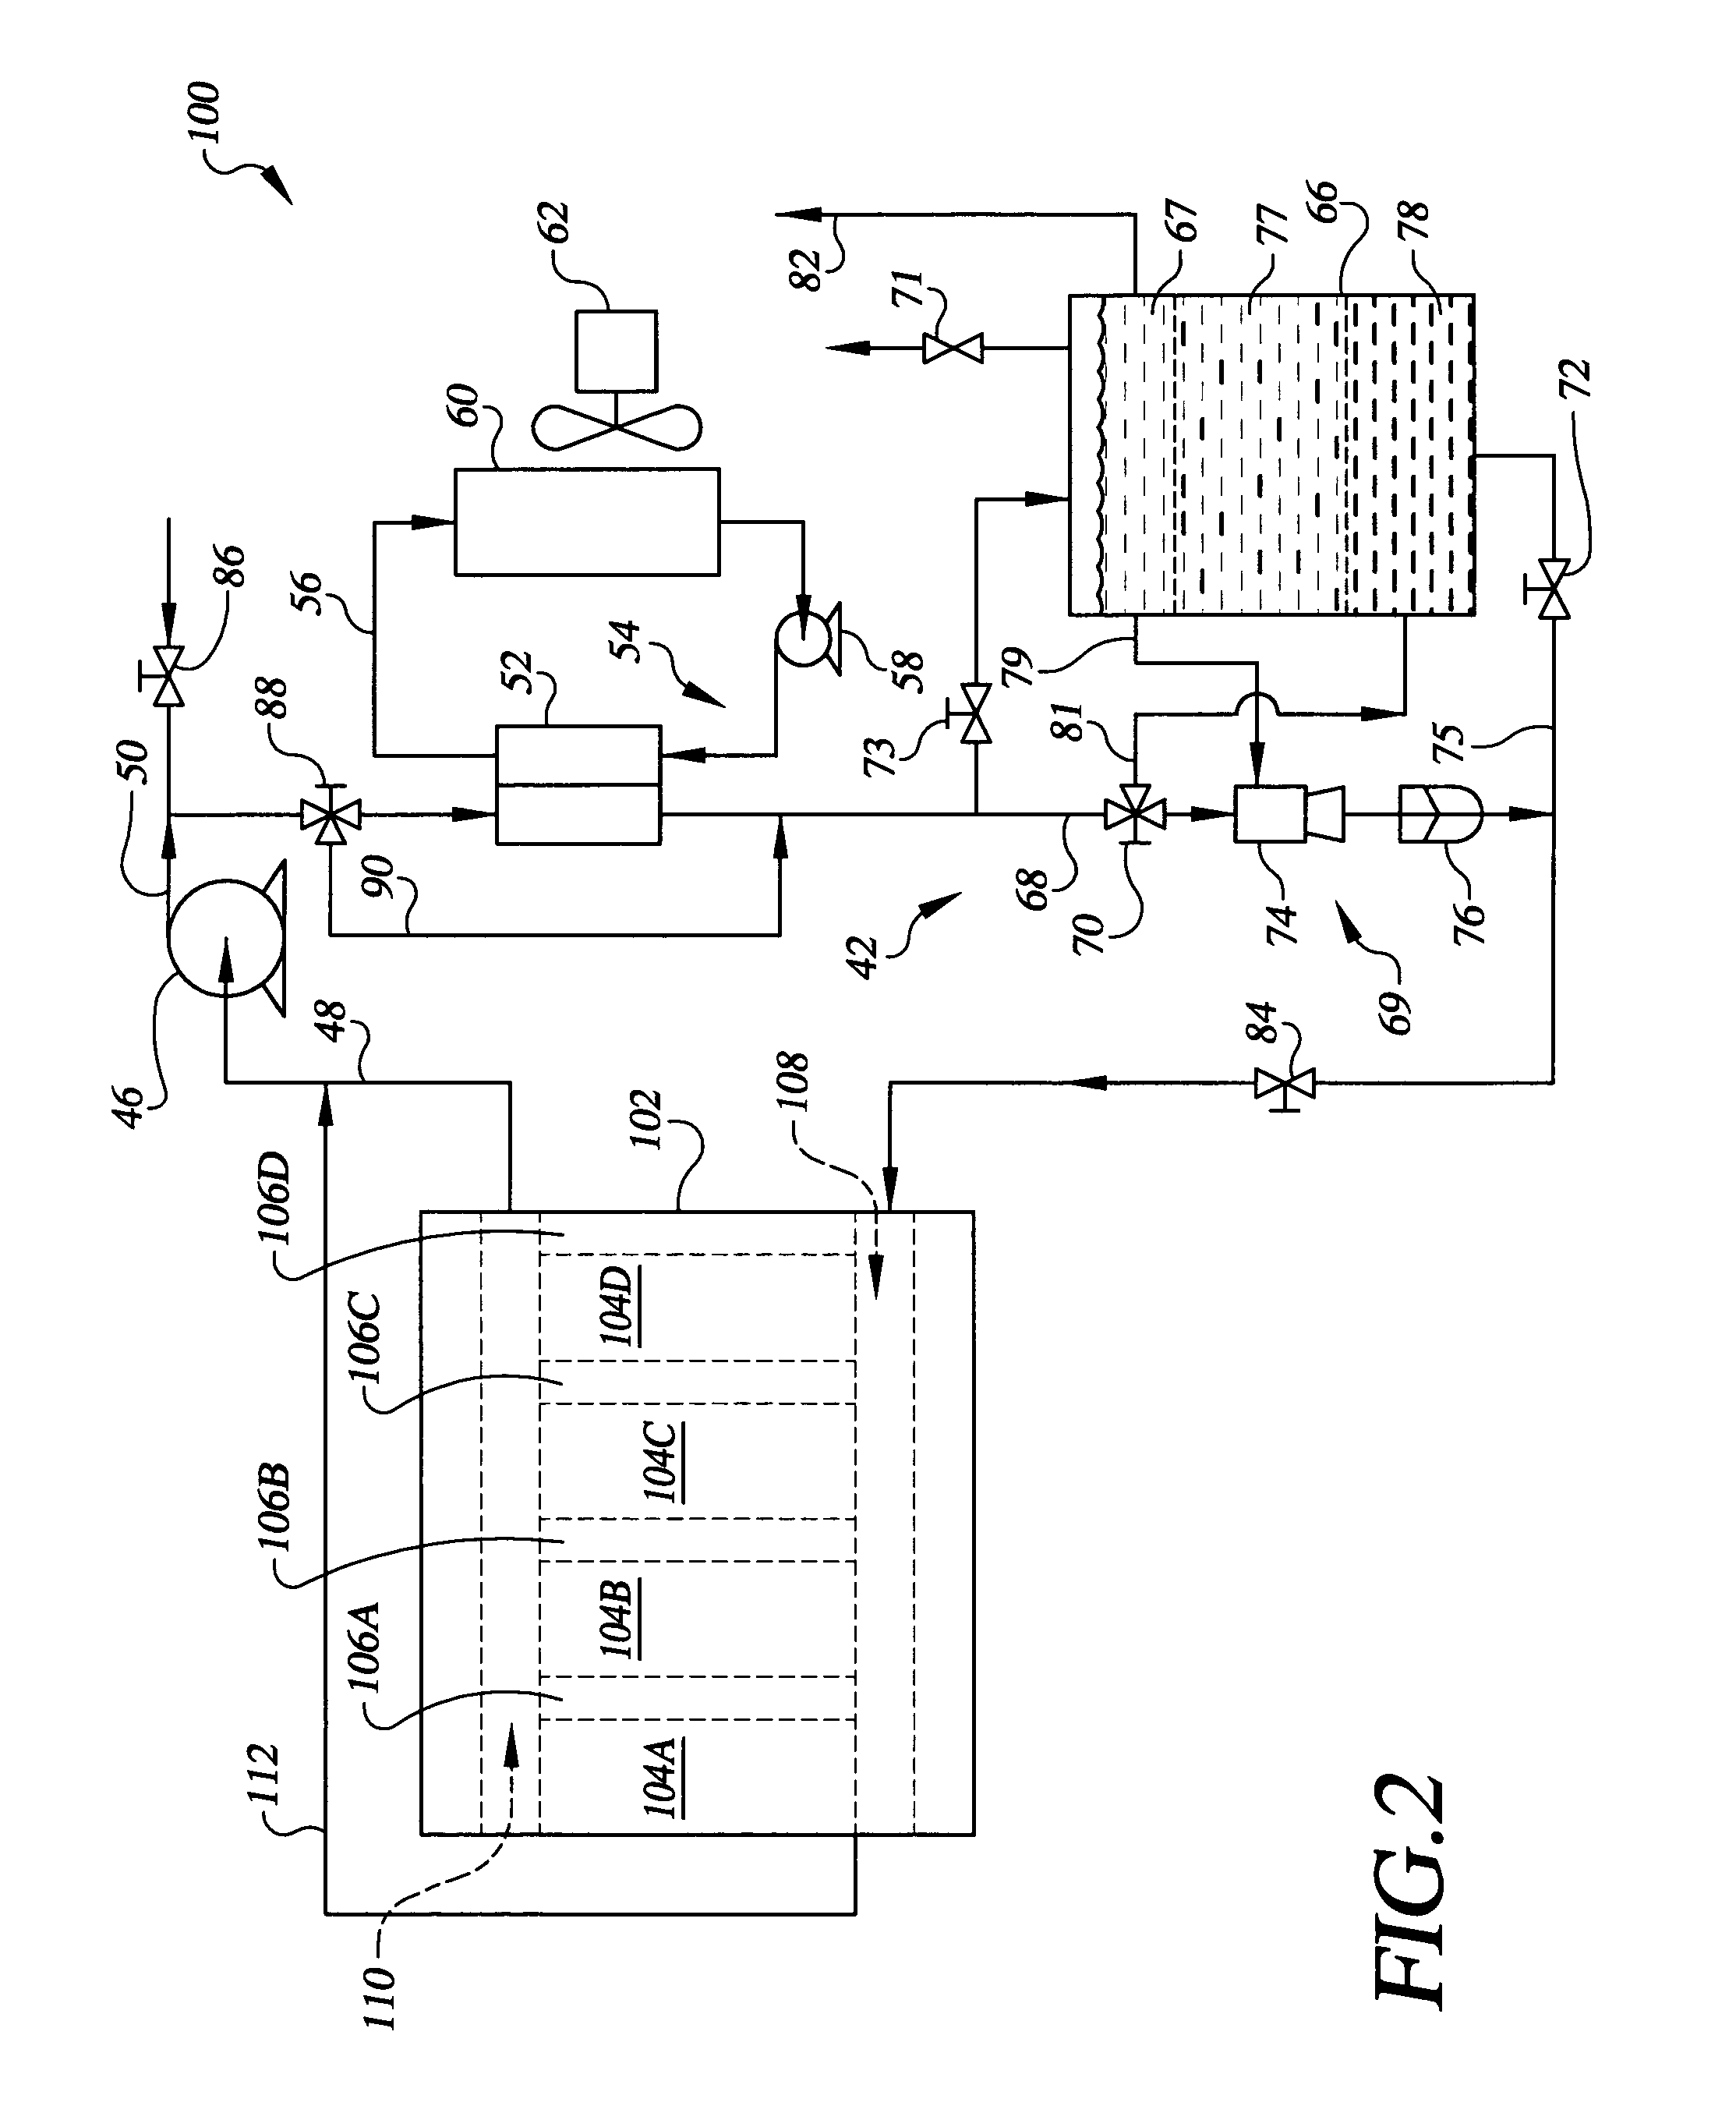 Freeze tolerant fuel cell power plant with a two-component mixed coolant